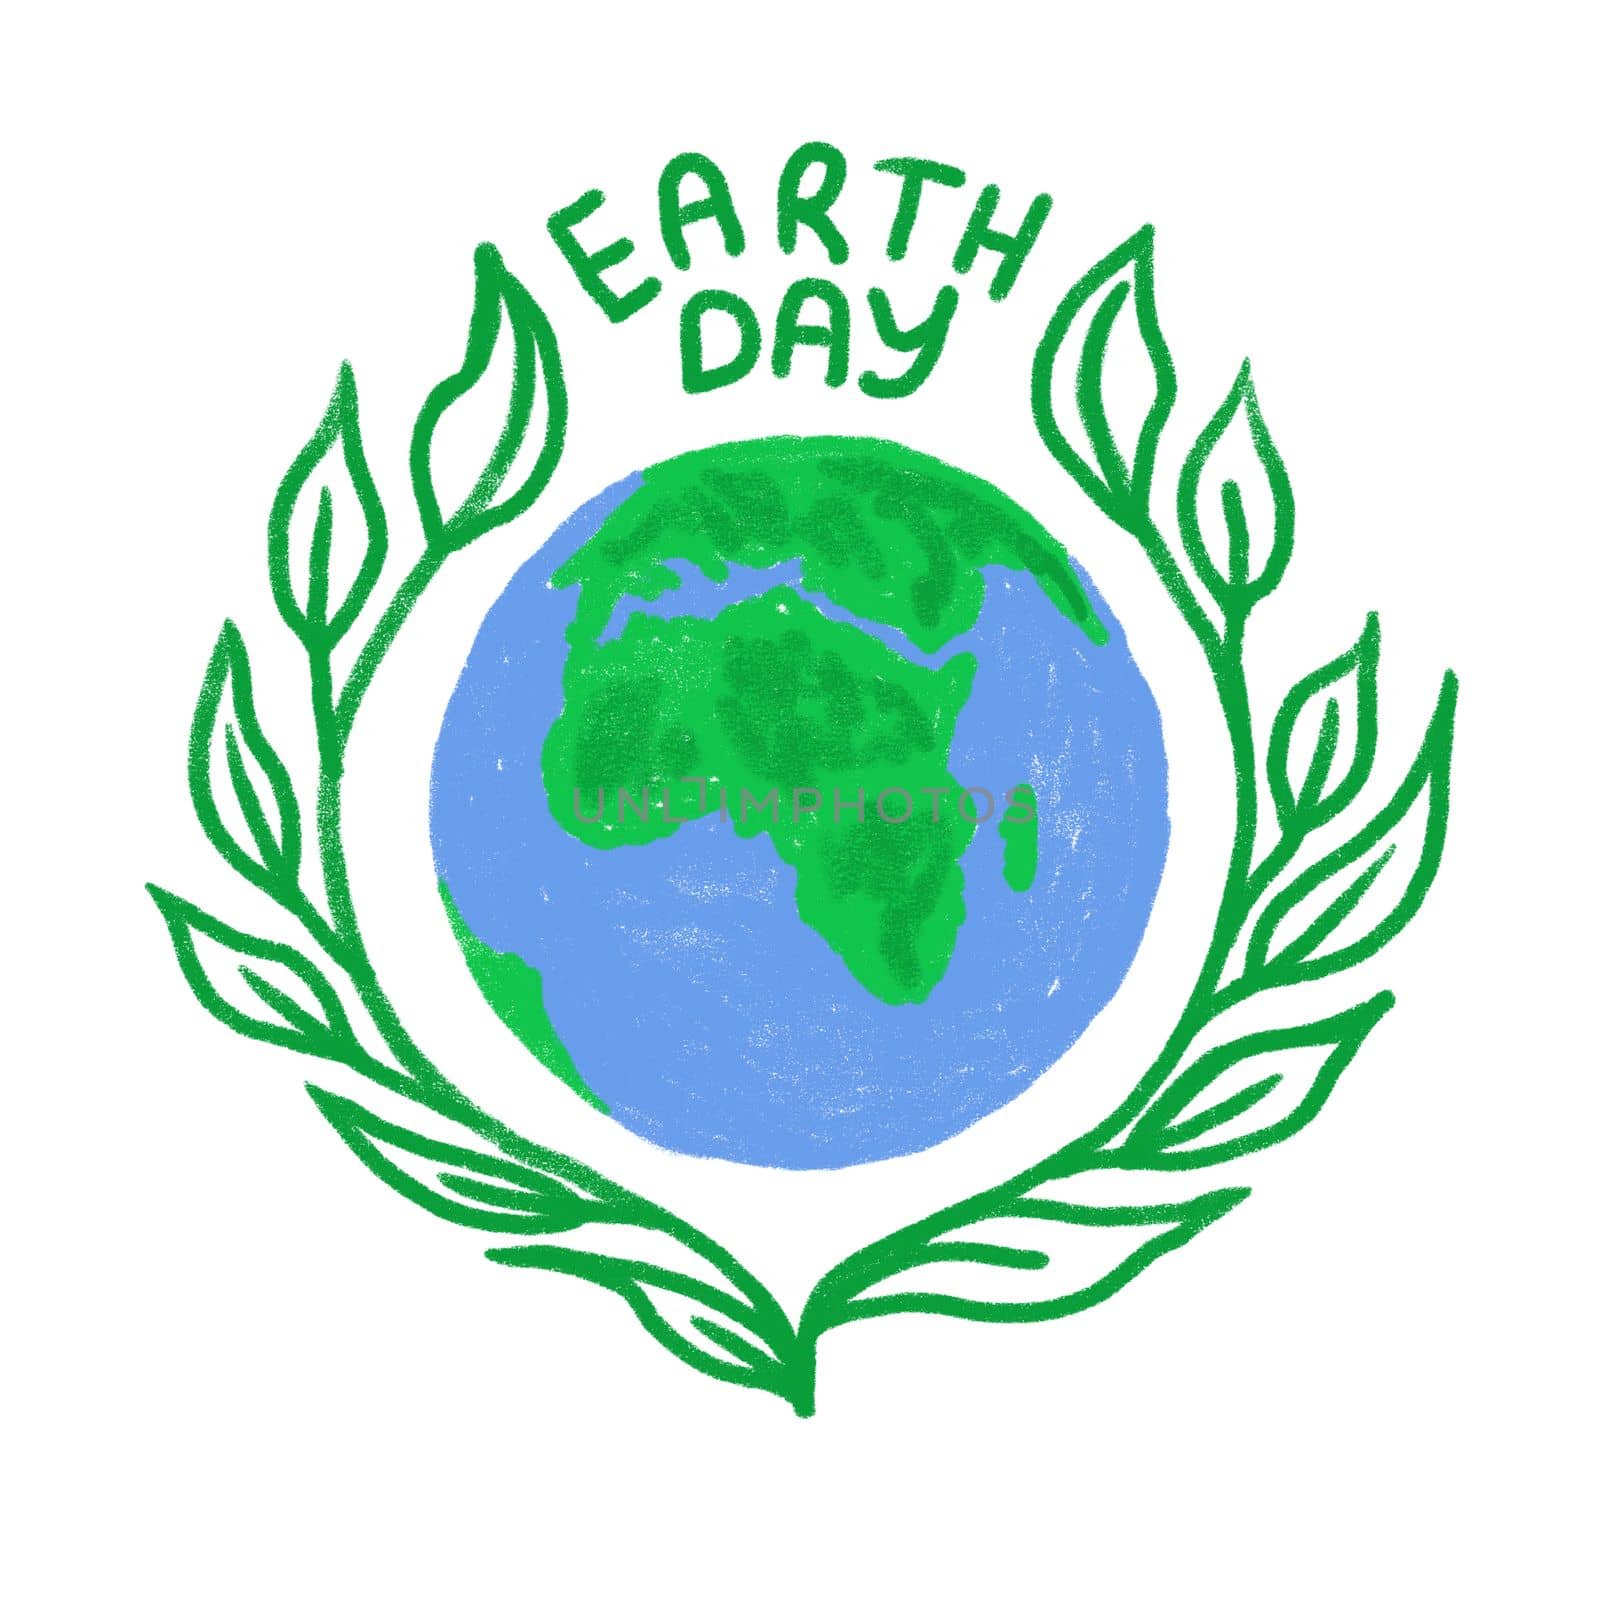 Hand drawn illustration of Earth Day globe planet ecology protection. Blue green sphere with ocean land, ecological environmental concept, pollution icon symbol, cartoon style modern poster